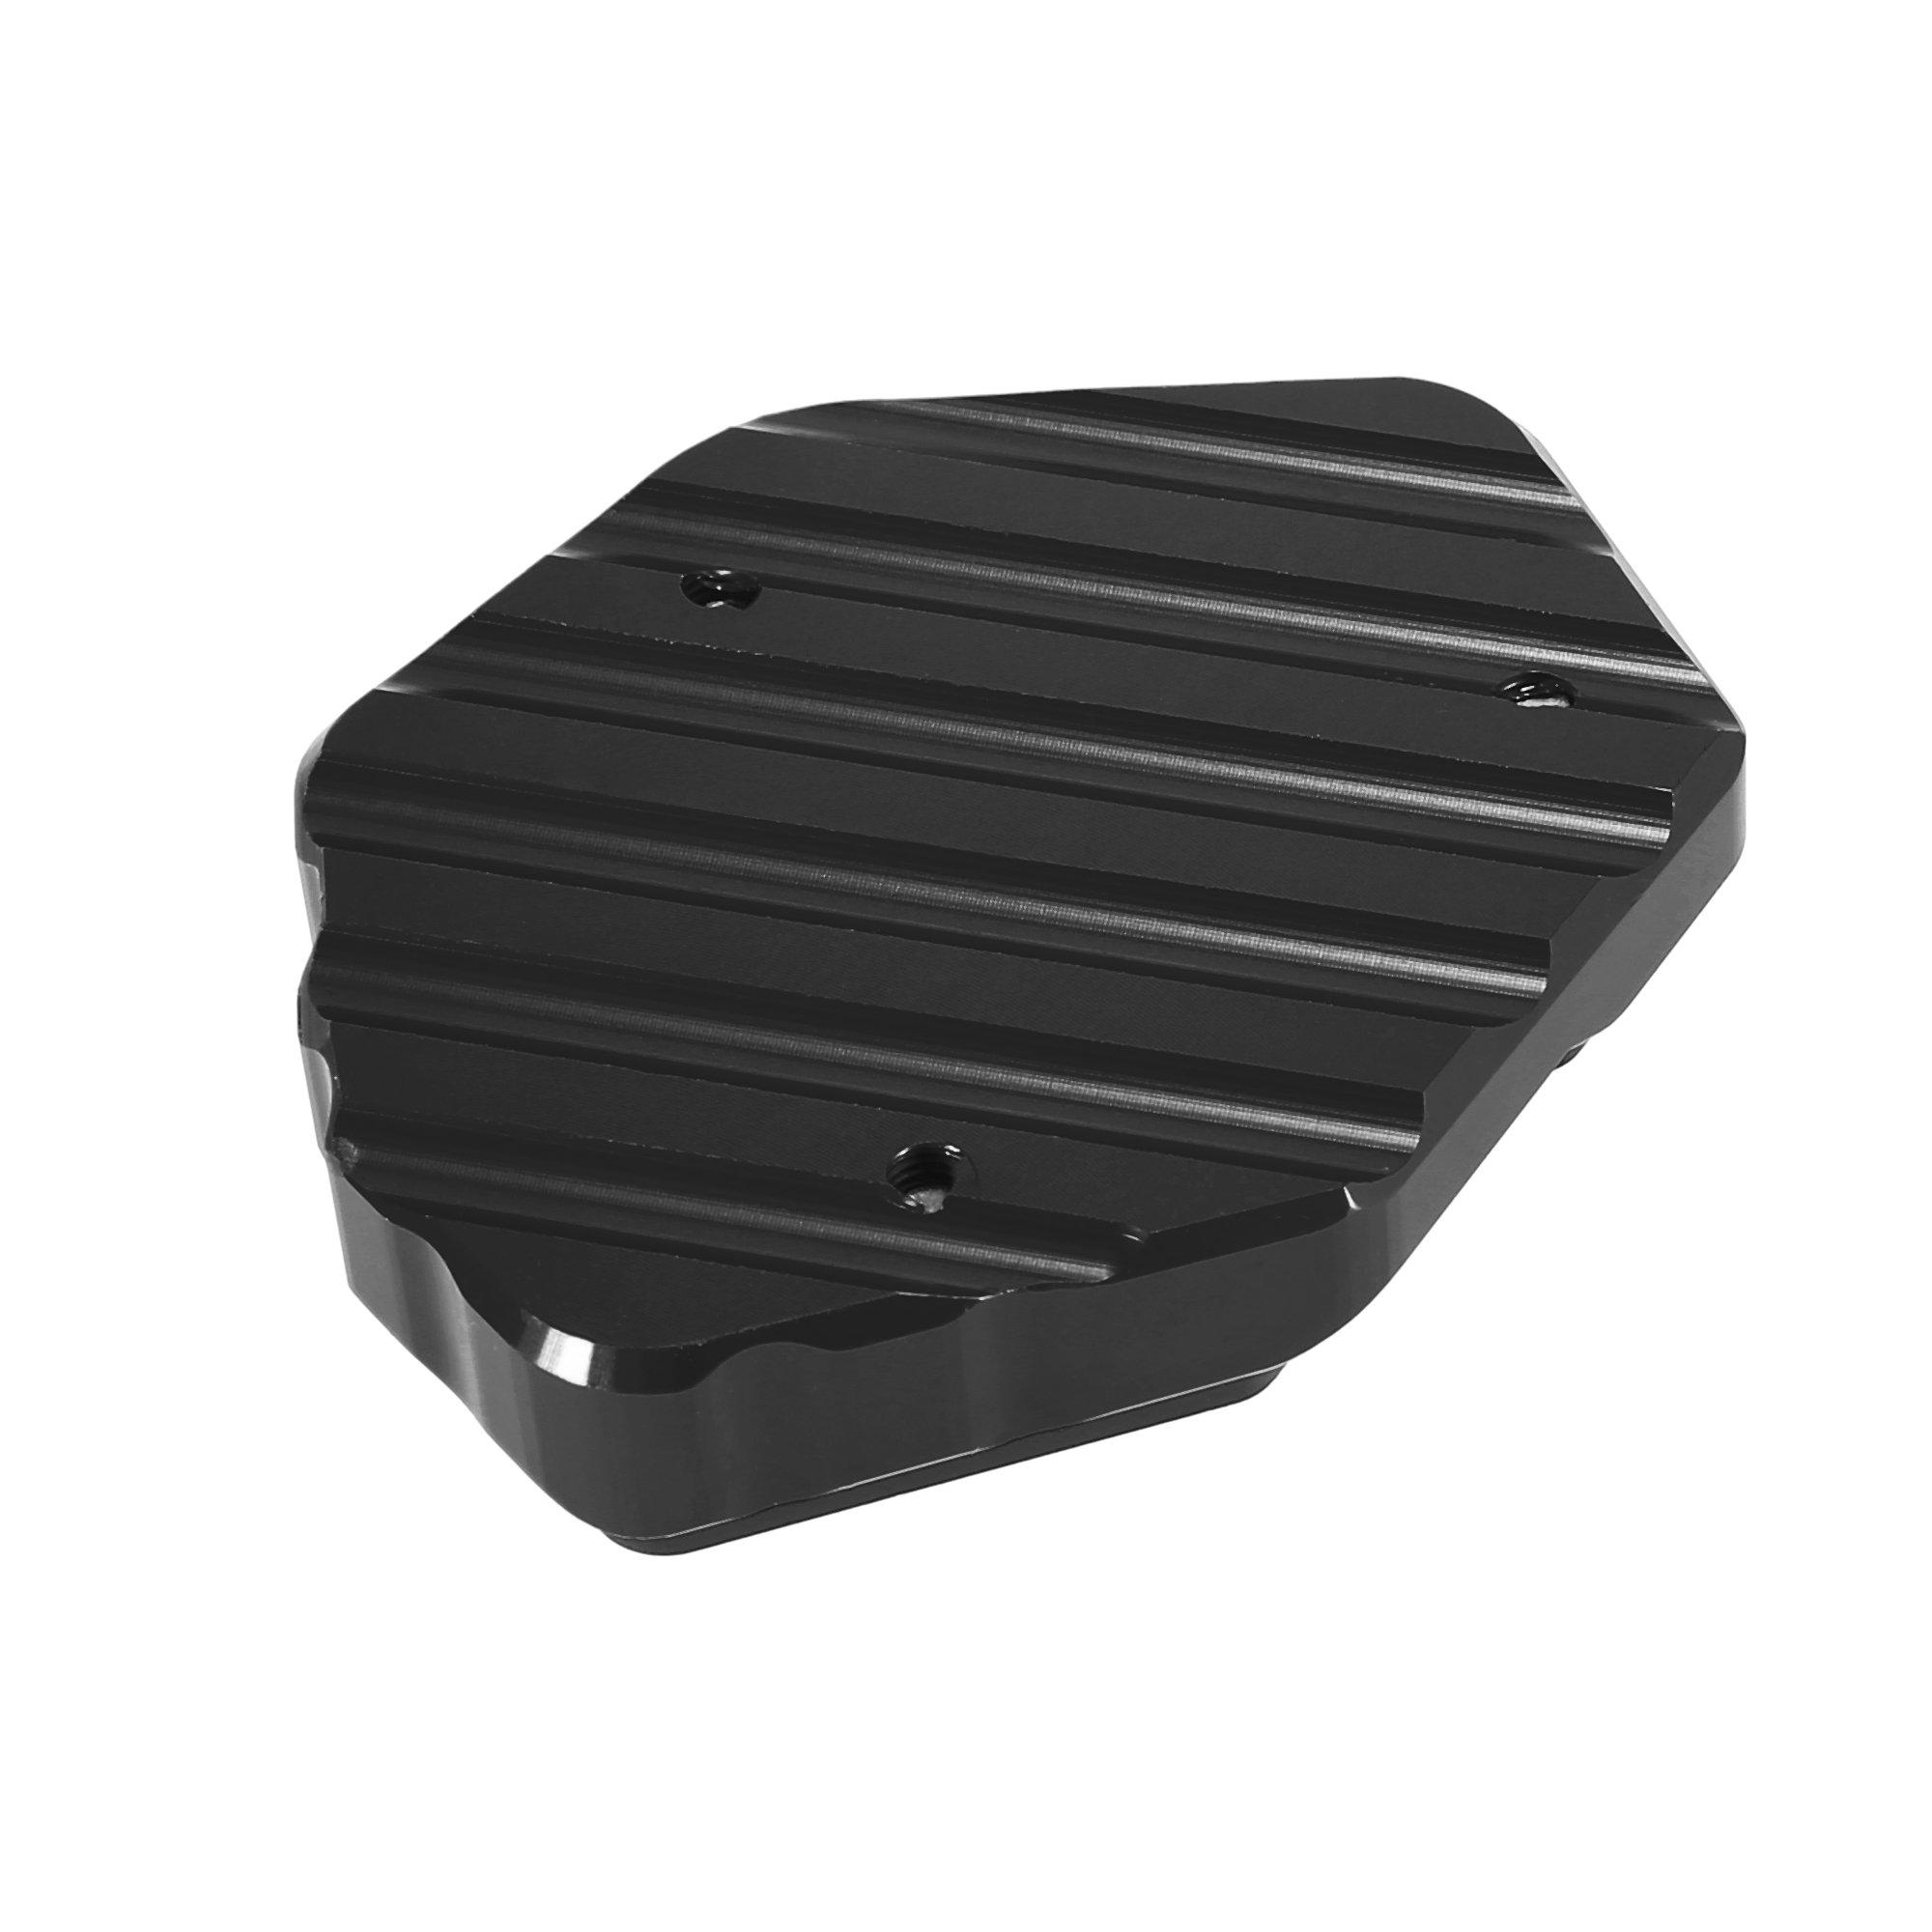 Unique Bargains Motorcycle Kickstand Foot Plate Side Stand Pad Black for Yamaha MT09 XSR900